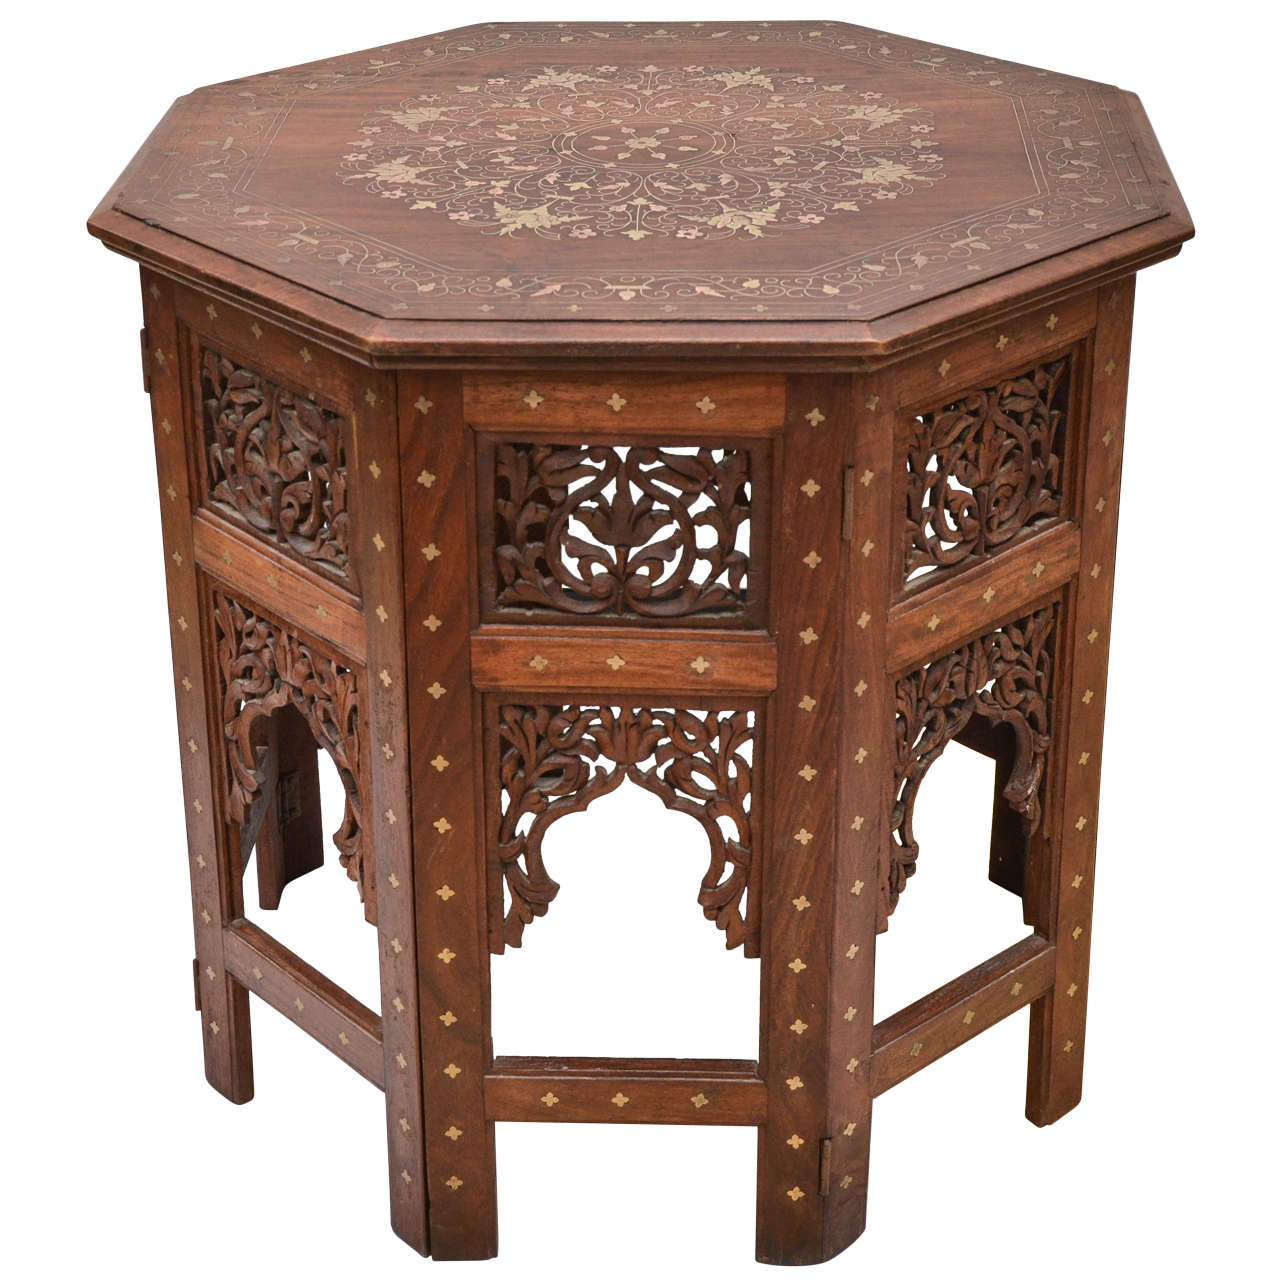 Large Octagonal Indian Teak with Brass Inlay Occasional Table